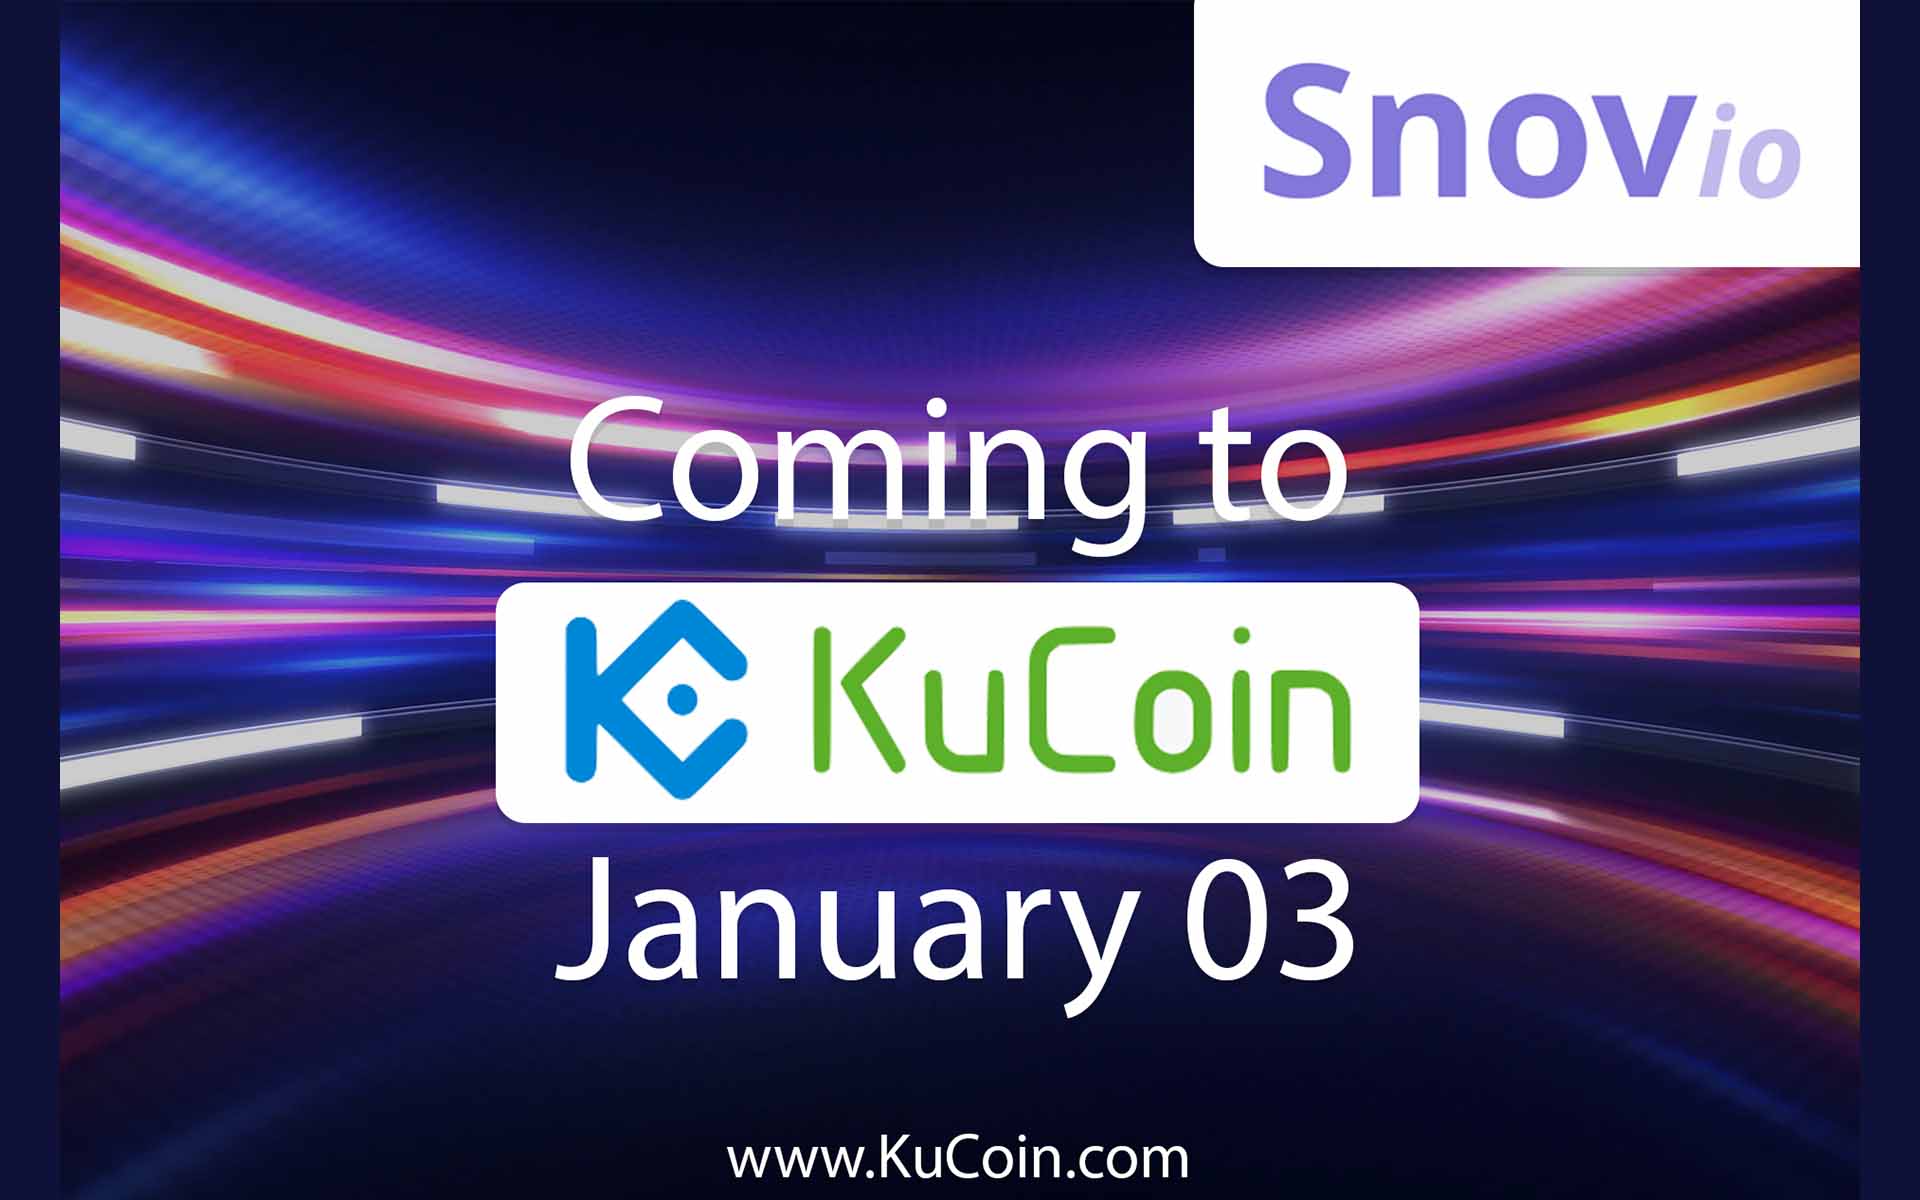 Snovio Lead Generation for the Blockchain Gets Released on KuCoin